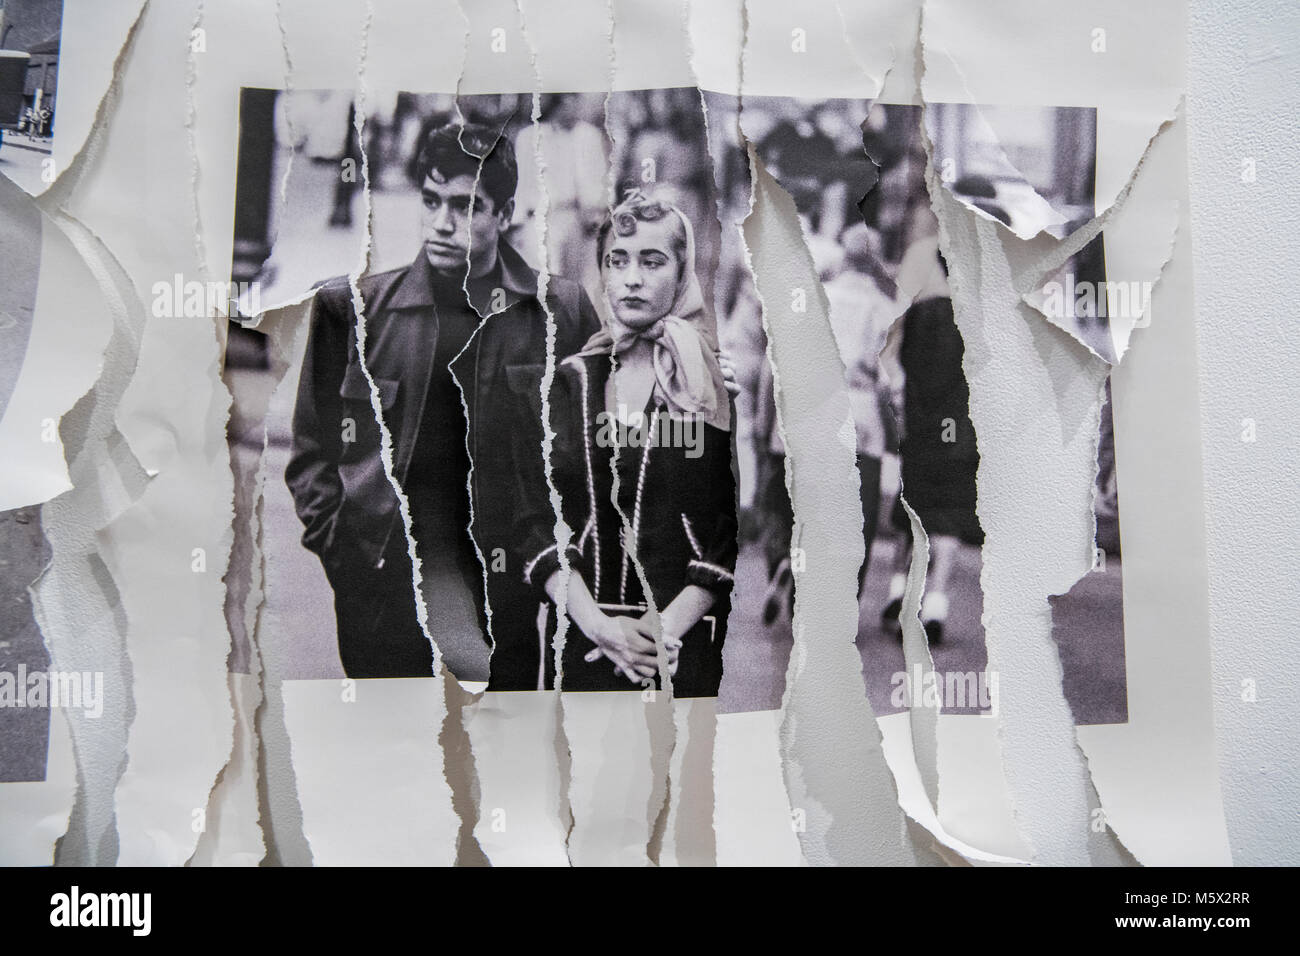 Portland, Oregon, USA. 26 FEB, 2018. The photographer Robert Frank's work from his groundbreaking book 'The Americans' hangs  defaced at Blue Sky Gallery in Portland, Oregon, USA. The work was destroyed in a “Destruction Dance” performance defacing the photographs with ink and mutilation with scissors, knives and even ice skates  at the end of it’s run. The destruction was Frank's protest regarding today's greed in the global art market. Credit: Ken Hawkins/Alamy Live News Stock Photo